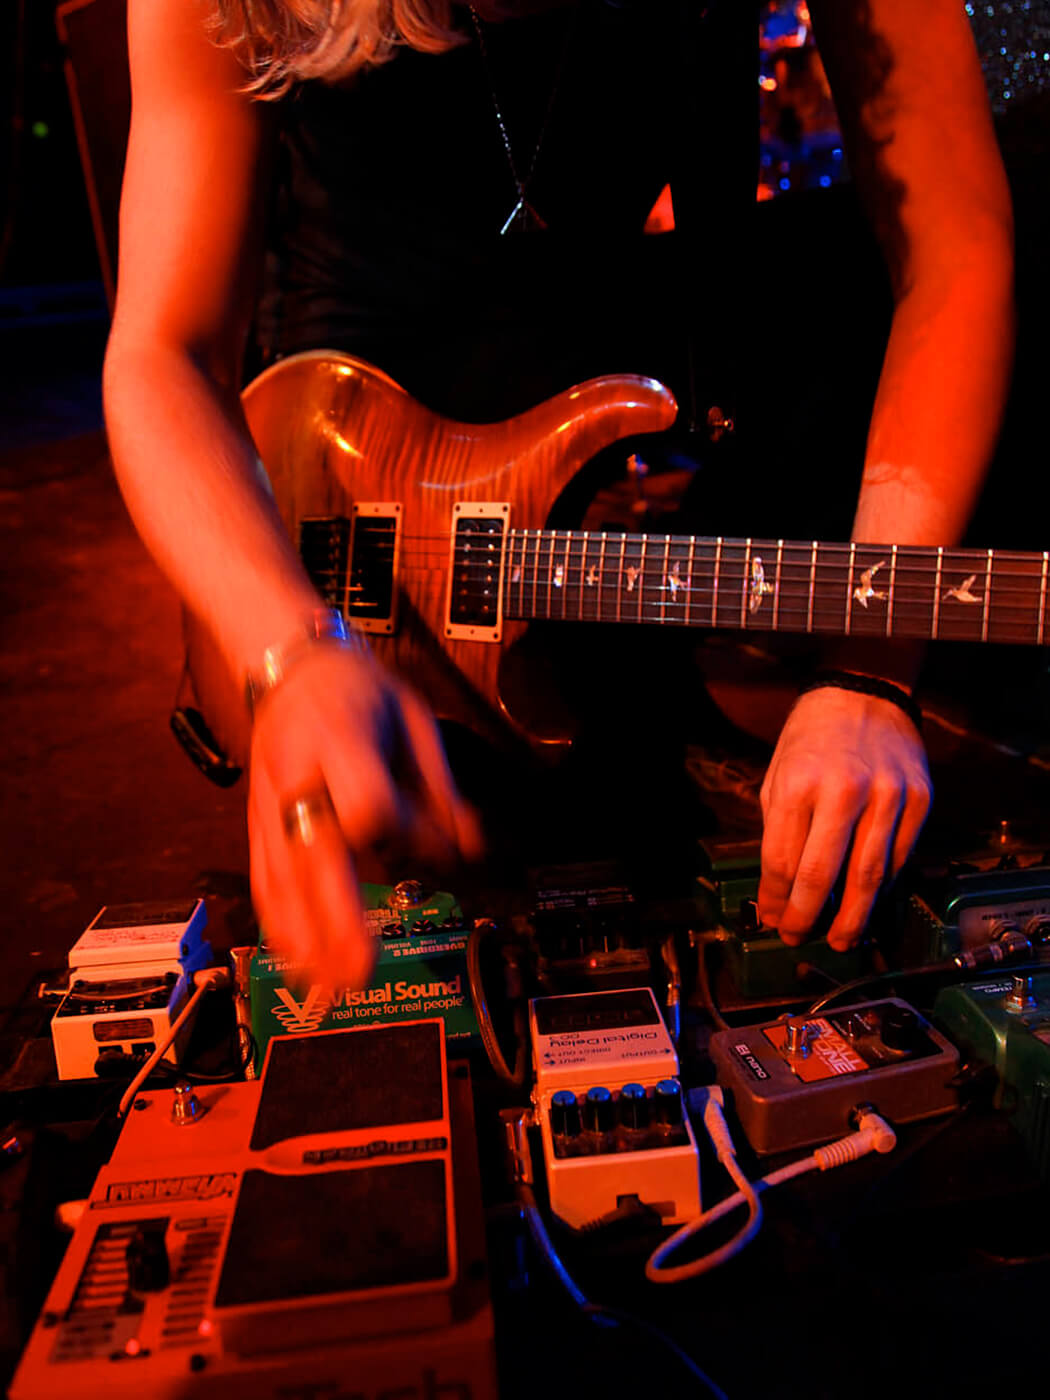 A guitarist altering guitar effects pedals onstage